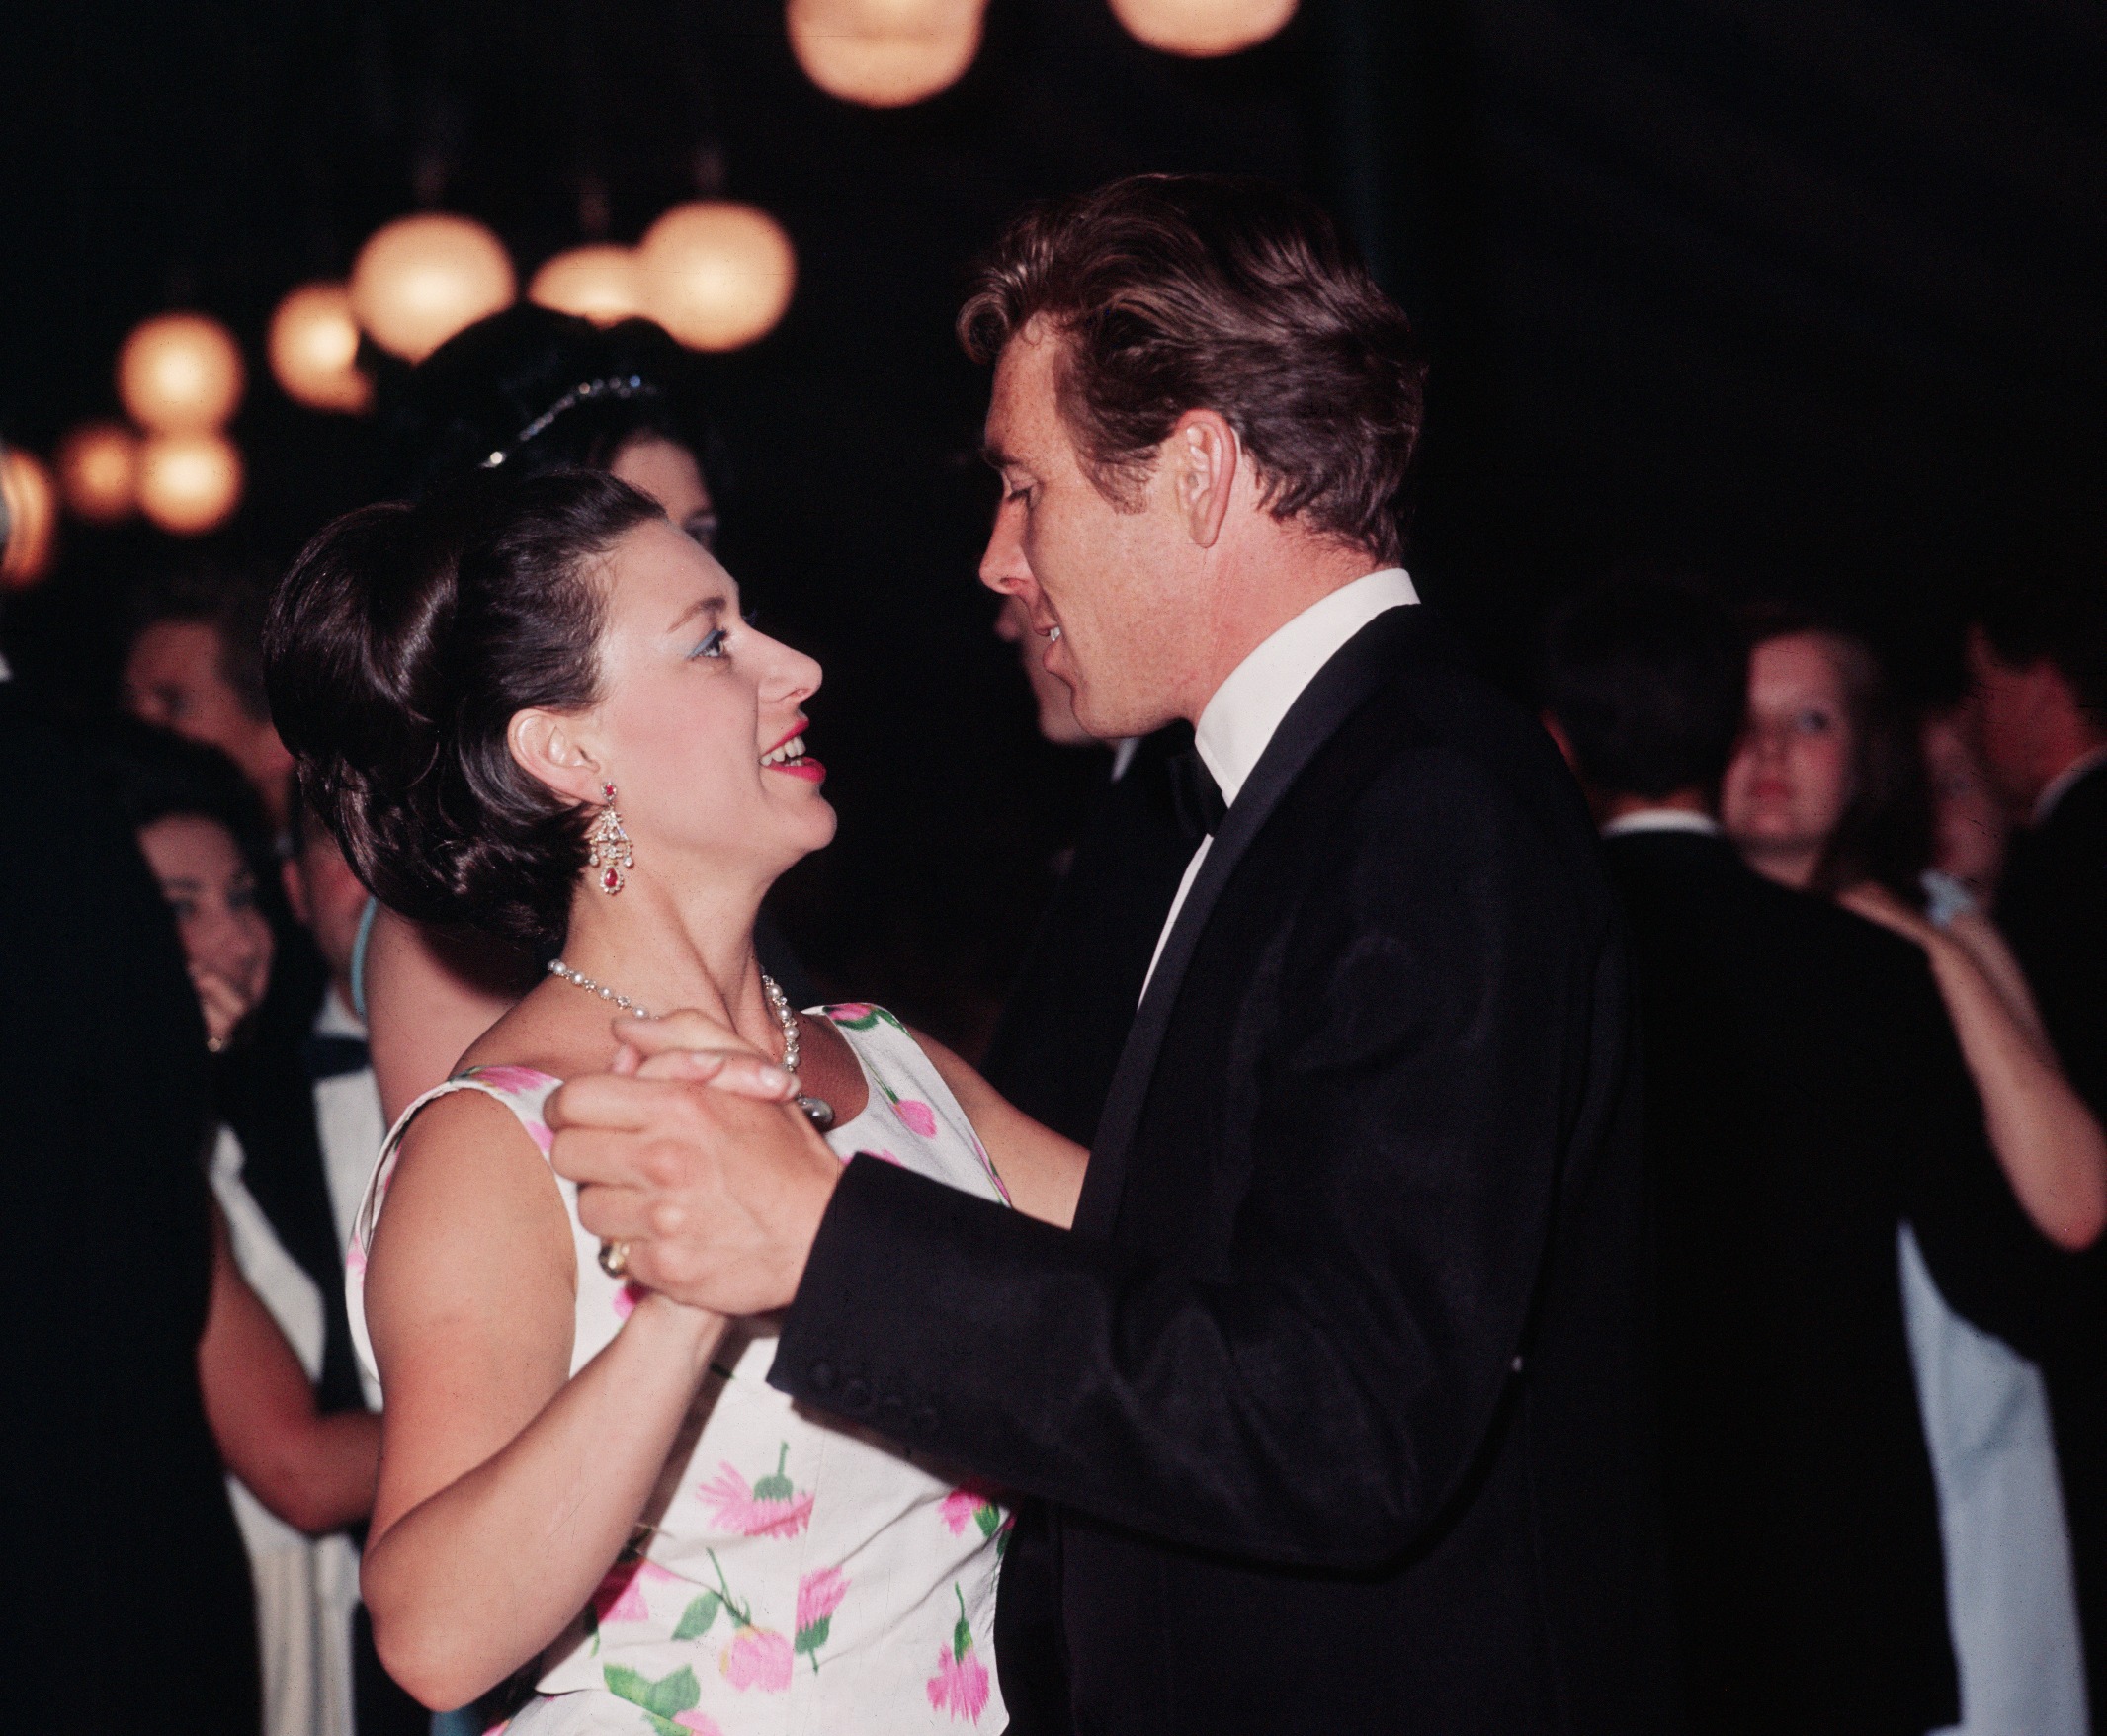 Margaret, pictured dancing with her husband Lord Antony Snowdon at a ball at the Tower of London, was a vivacious 'party princess'